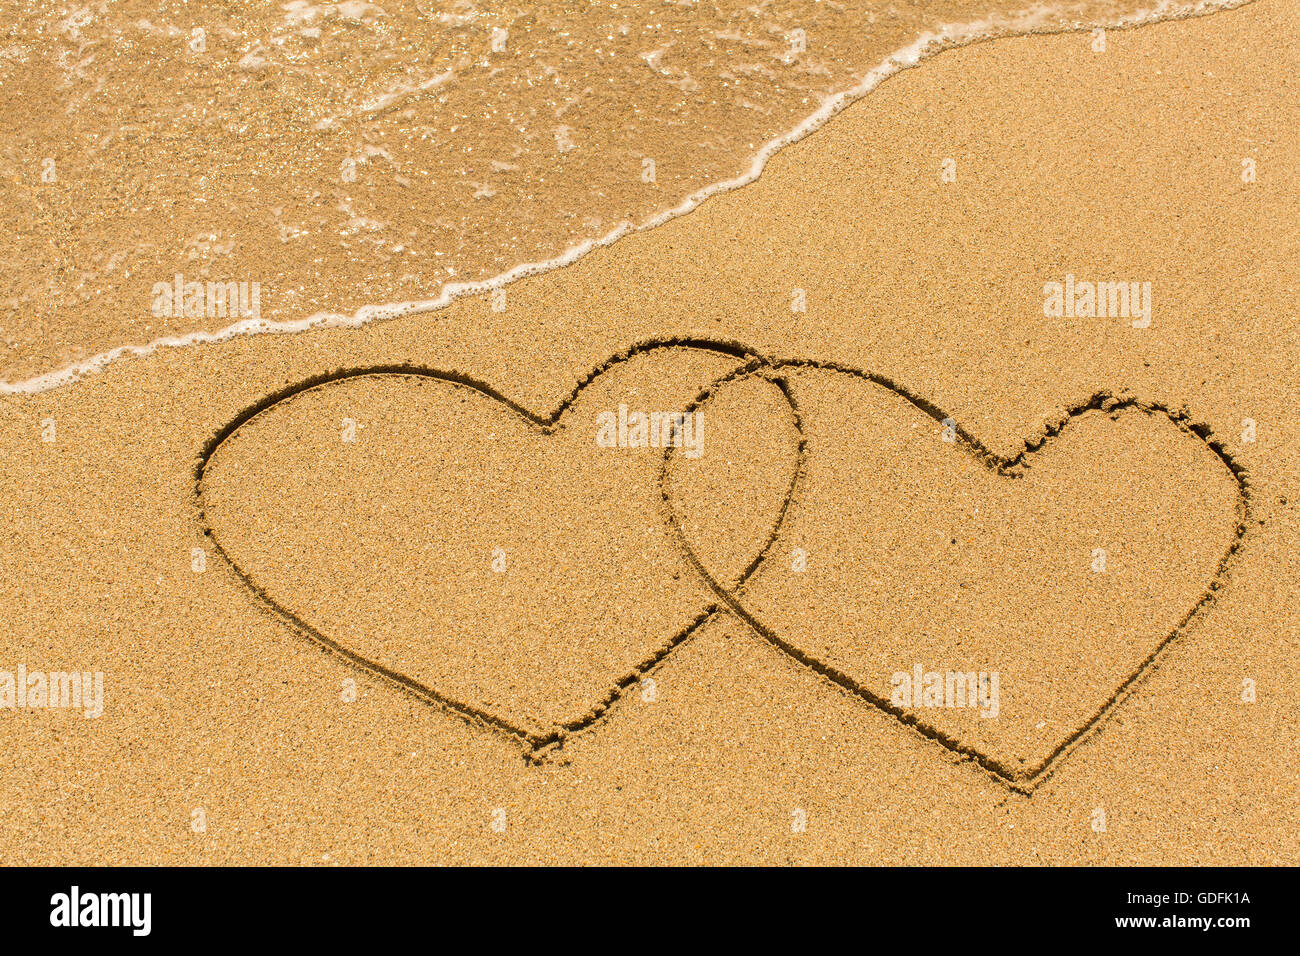 Two of hearts drawn on a sandy beach in the line of sea surf. Stock Photo